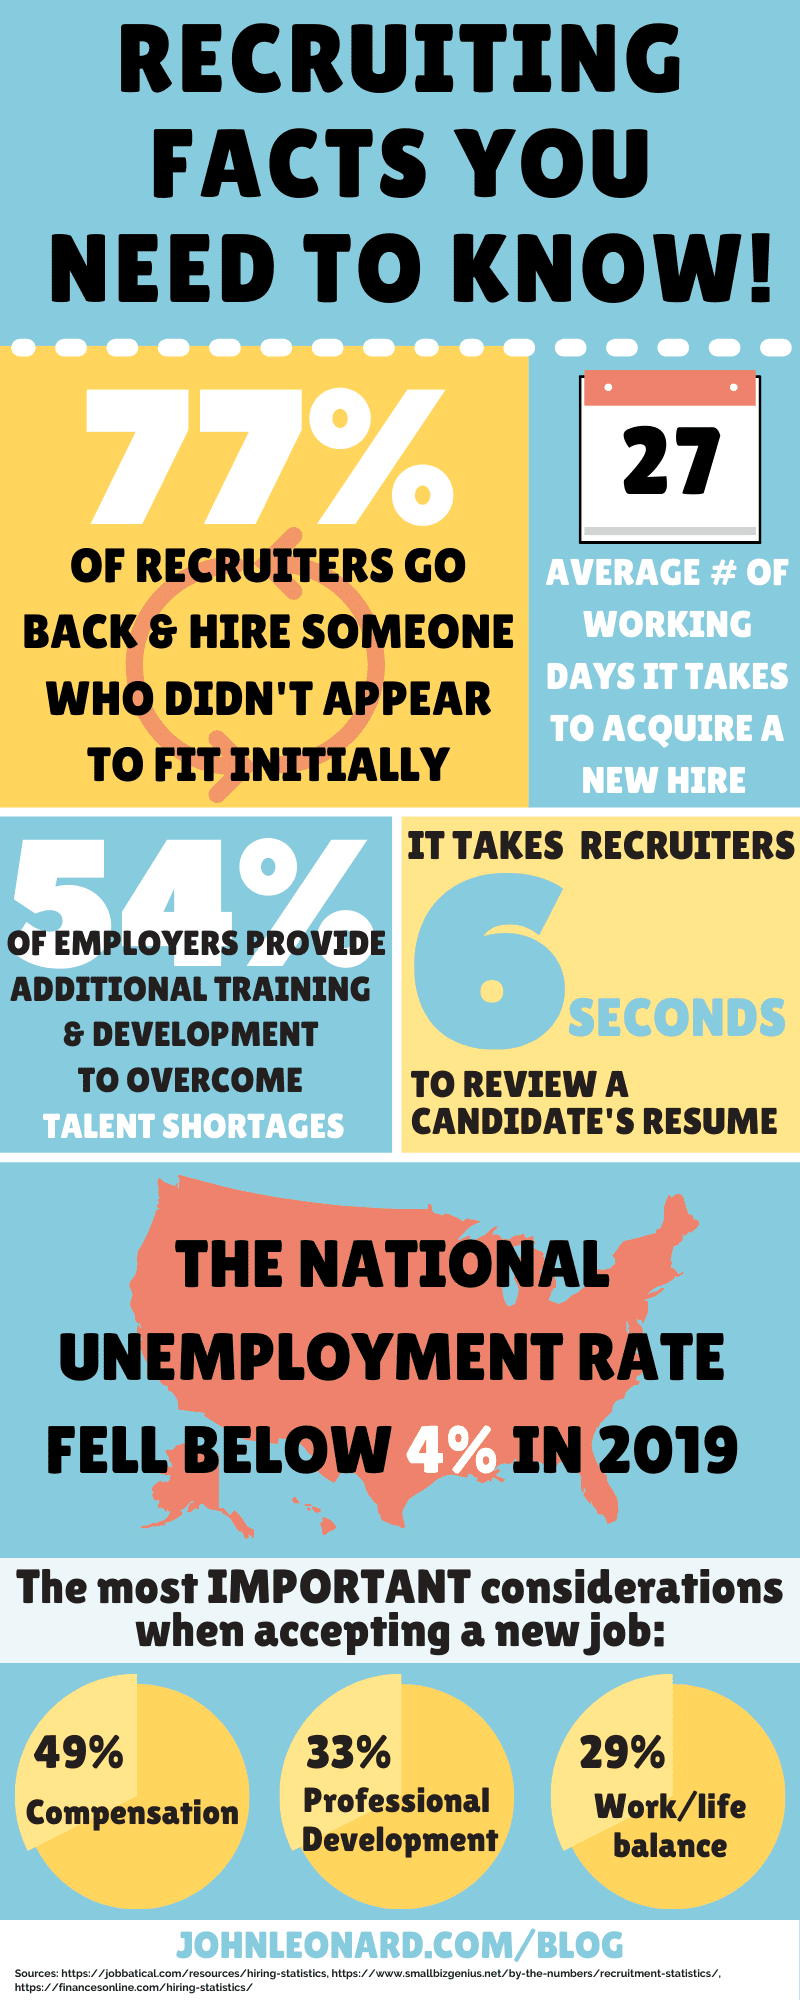 Recruiting Facts You Need to Know (Infographic)